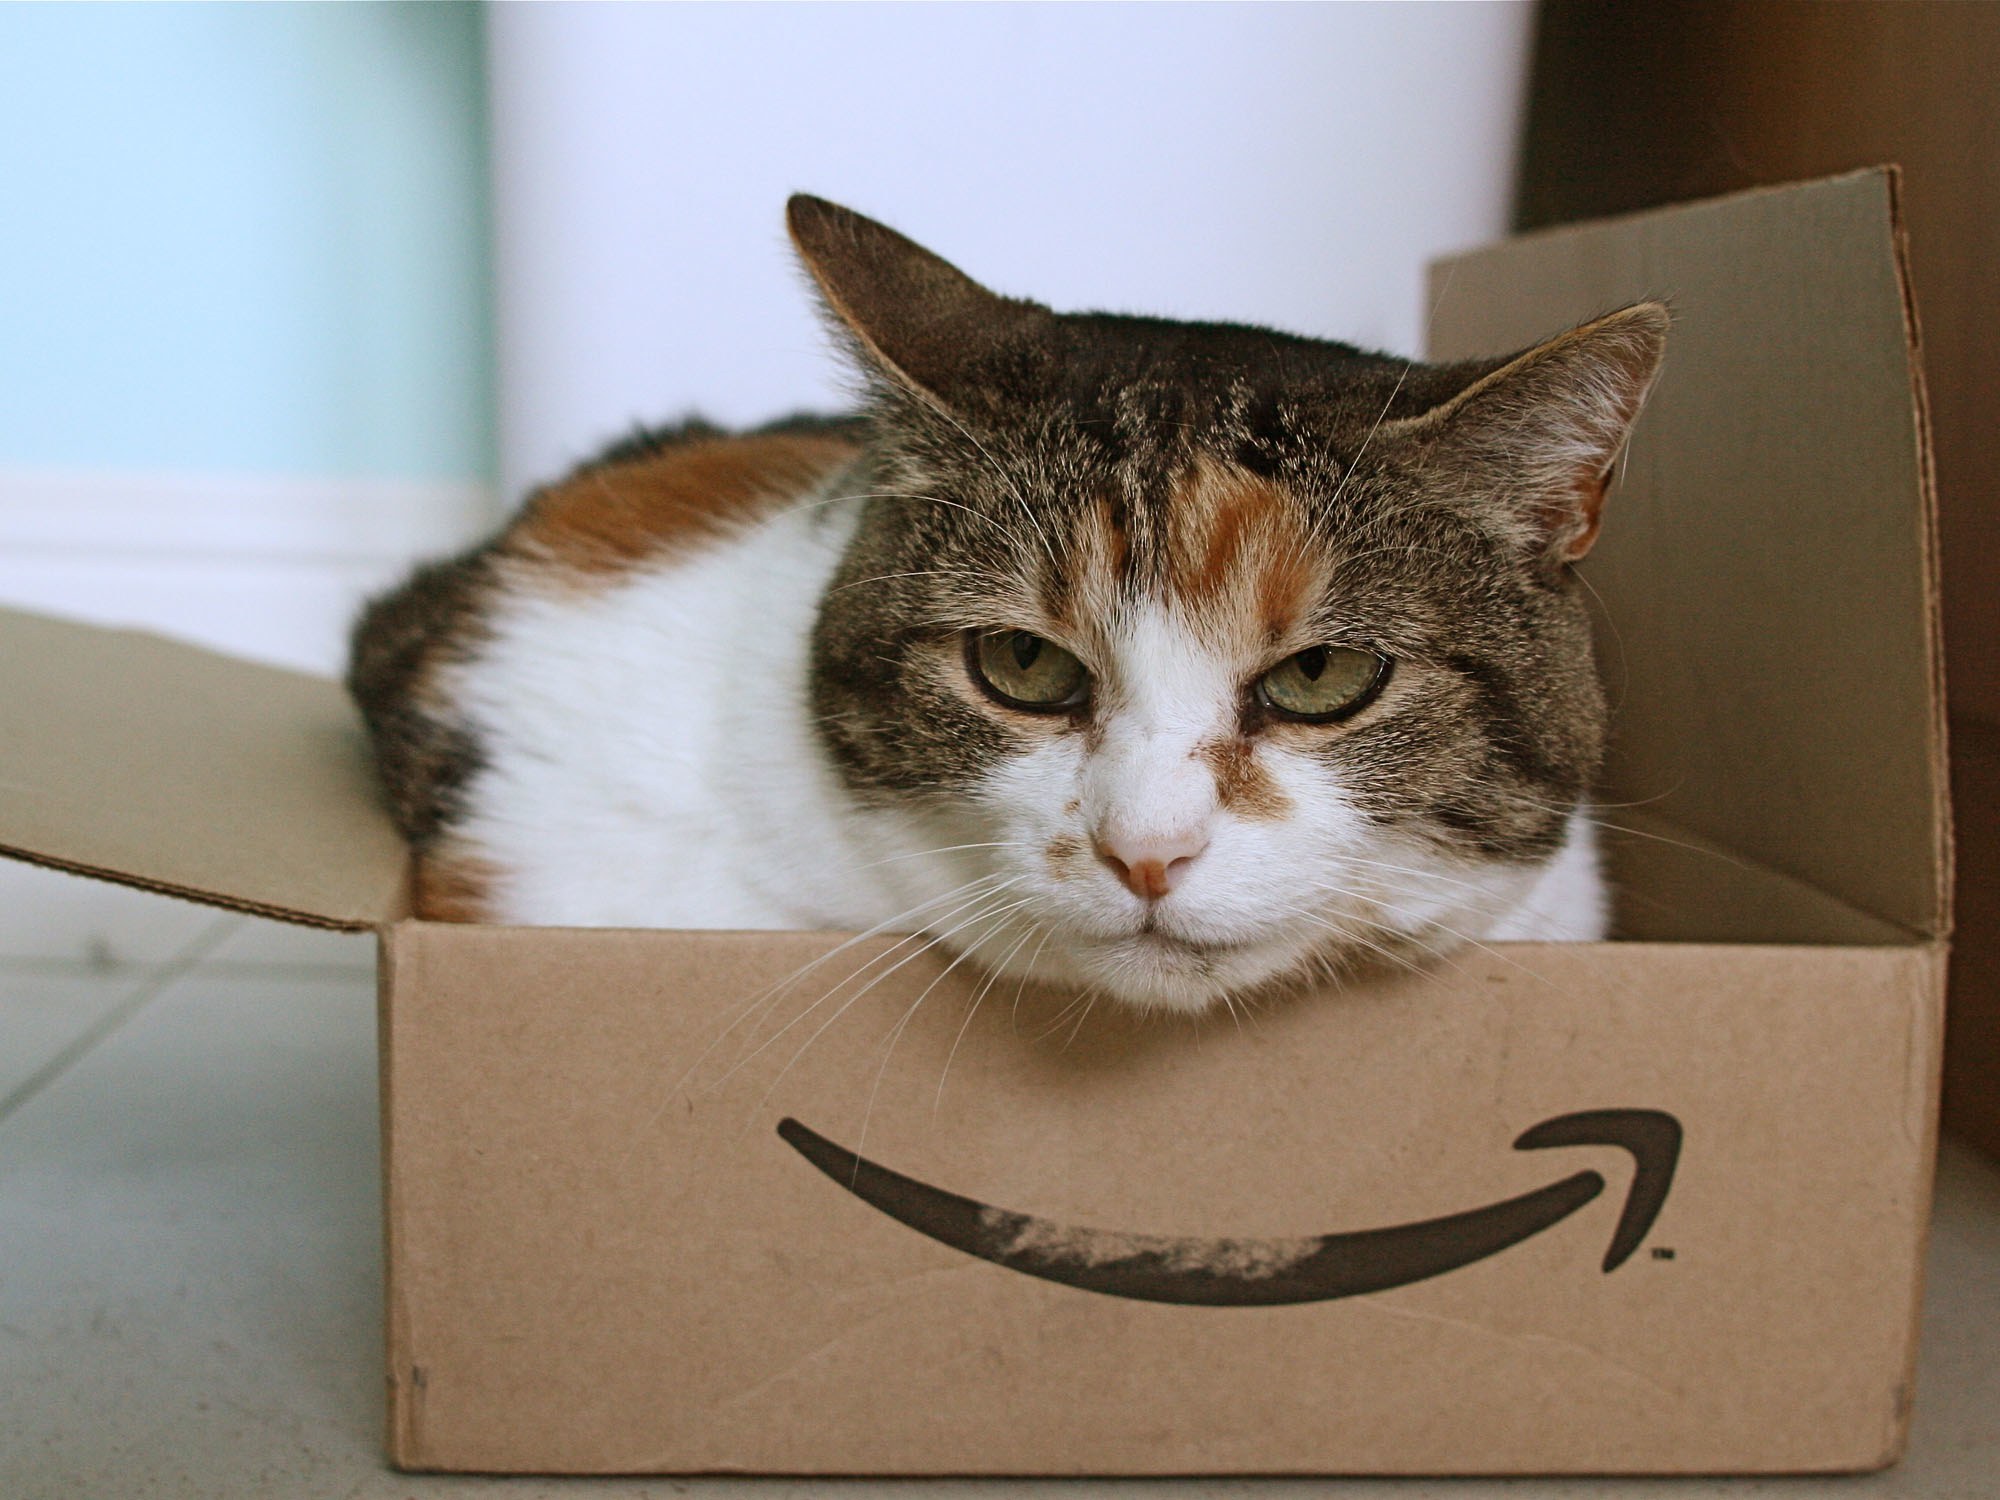 What's Up With That: Why Do Cats Love Boxes So Much? | WIRED